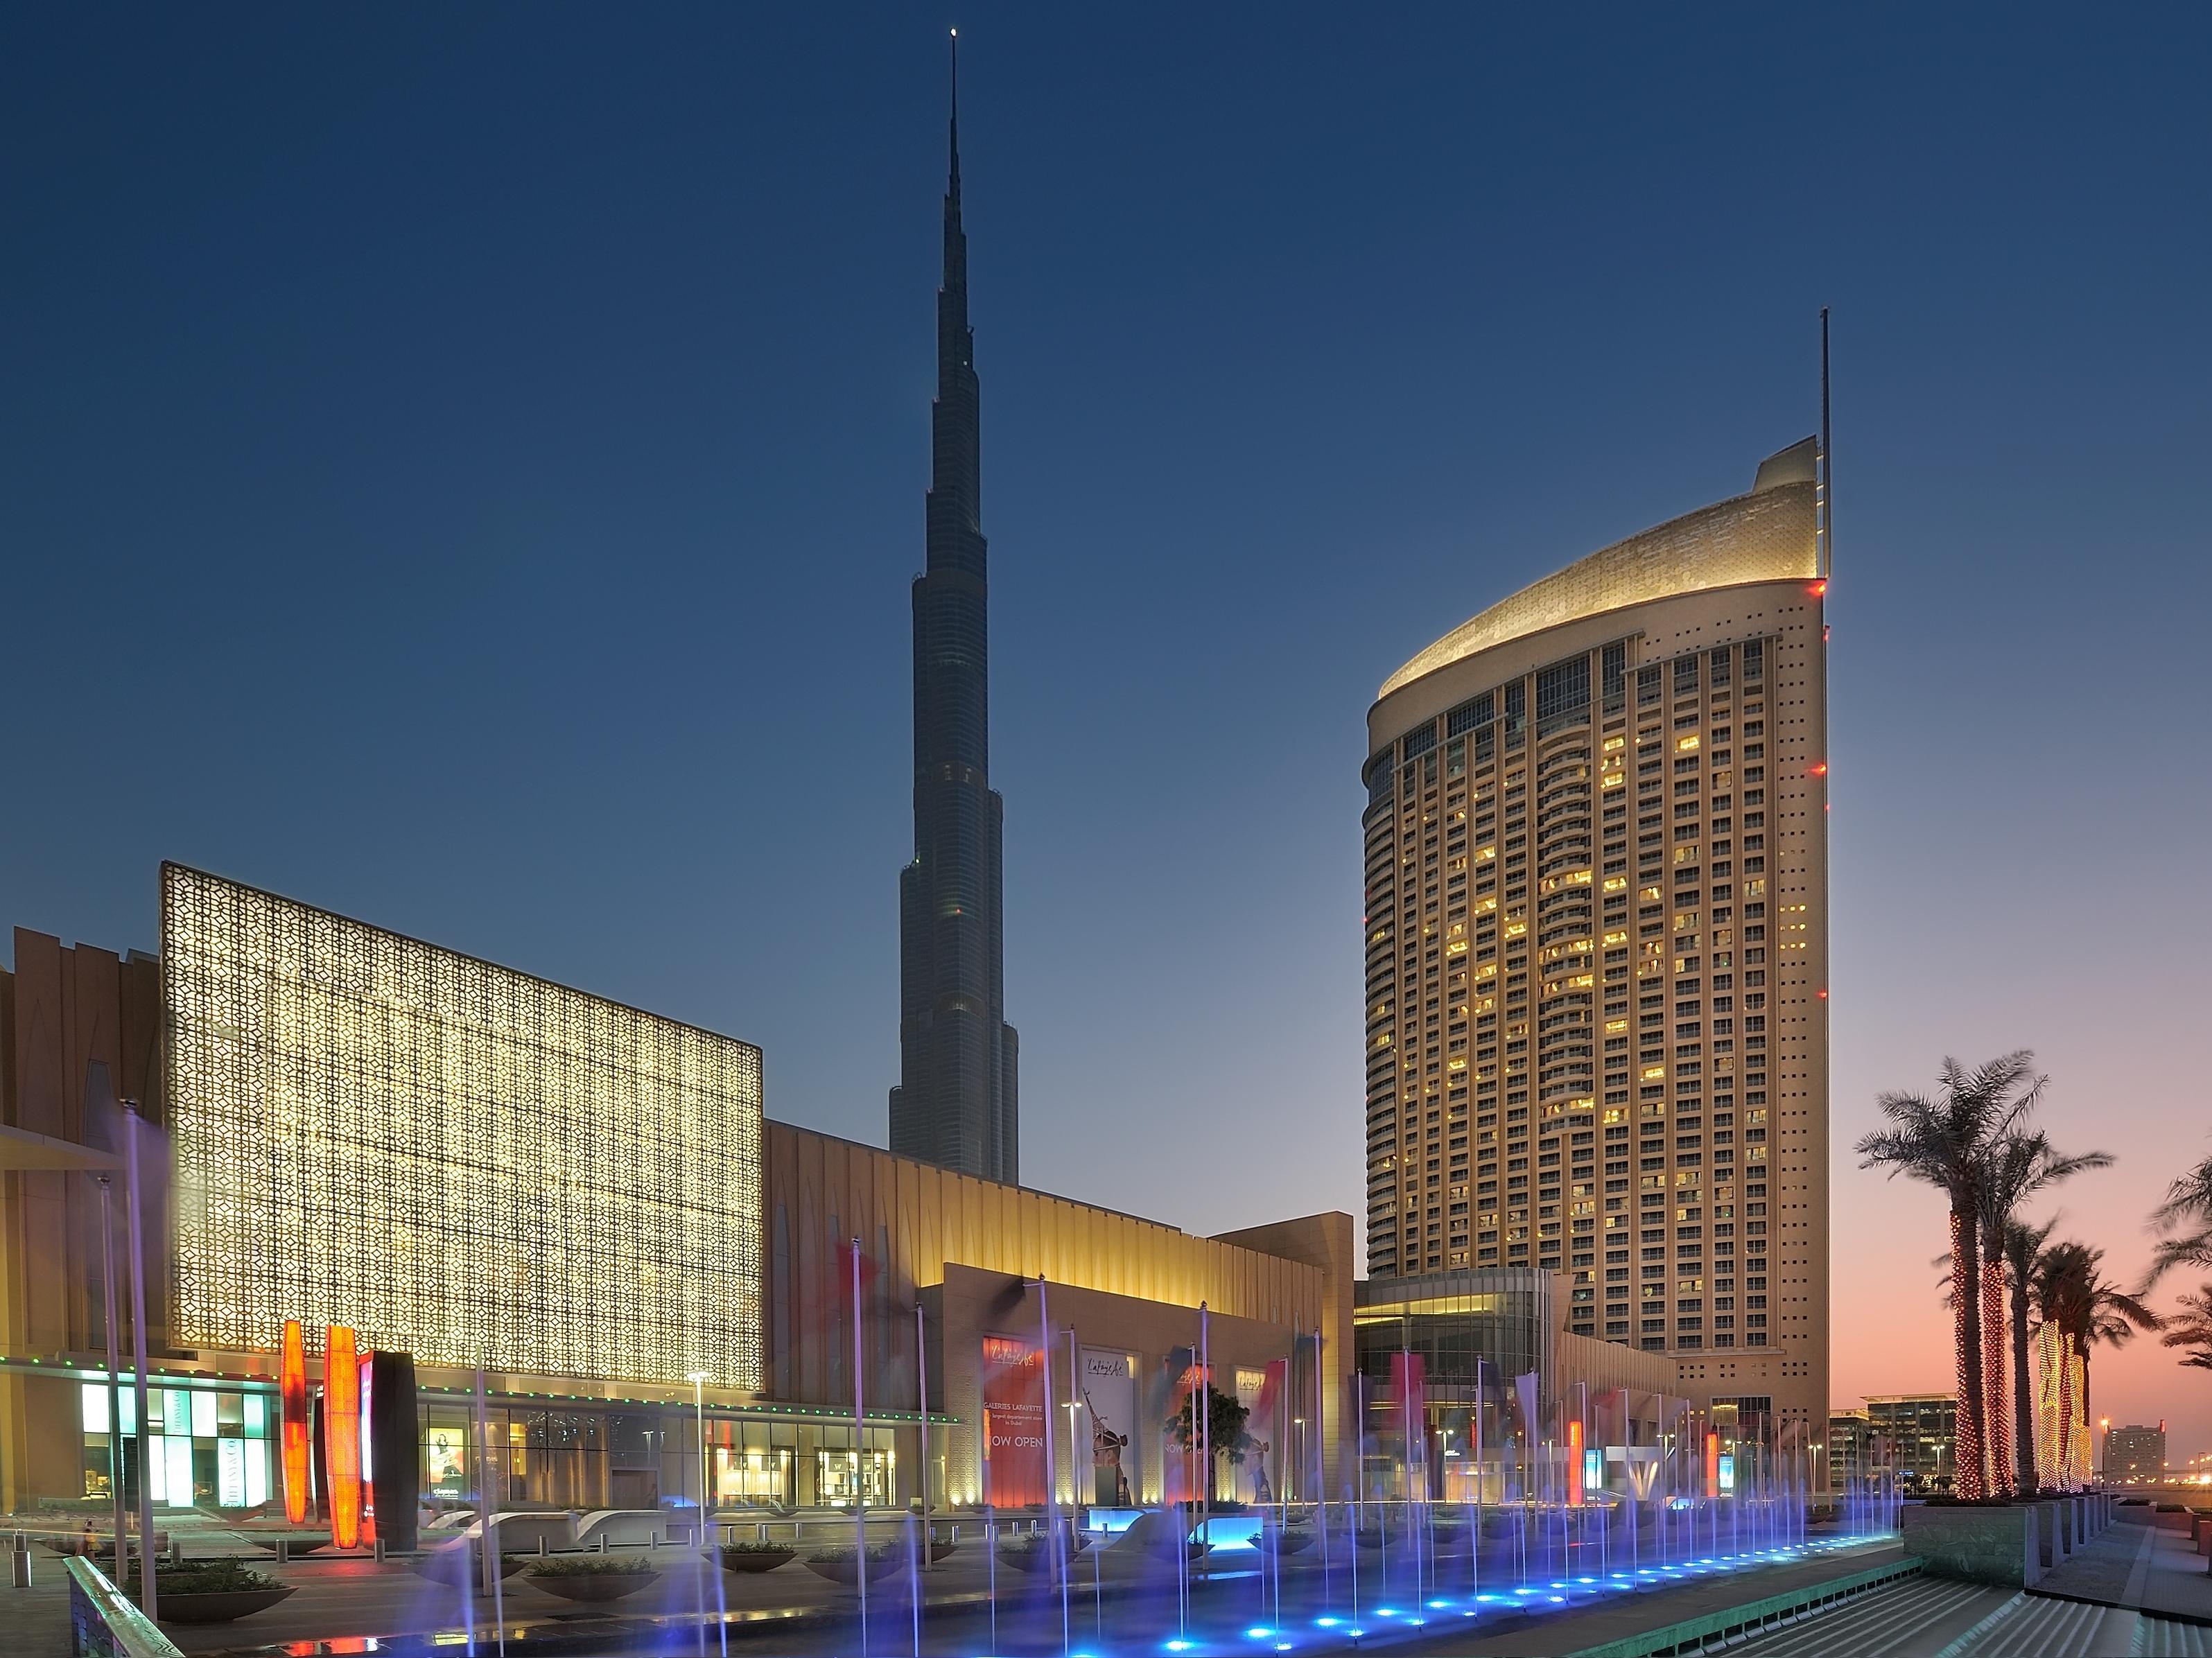 The Address Dubai Mall Hotel Emirate of Dubai FAQ 2016, What facilities are there in The Address Dubai Mall Hotel Emirate of Dubai 2016, What Languages Spoken are Supported in The Address Dubai Mall Hotel Emirate of Dubai 2016, Which payment cards are accepted in The Address Dubai Mall Hotel Emirate of Dubai , Emirate of Dubai The Address Dubai Mall Hotel room facilities and services Q&A 2016, Emirate of Dubai The Address Dubai Mall Hotel online booking services 2016, Emirate of Dubai The Address Dubai Mall Hotel address 2016, Emirate of Dubai The Address Dubai Mall Hotel telephone number 2016,Emirate of Dubai The Address Dubai Mall Hotel map 2016, Emirate of Dubai The Address Dubai Mall Hotel traffic guide 2016, how to go Emirate of Dubai The Address Dubai Mall Hotel, Emirate of Dubai The Address Dubai Mall Hotel booking online 2016, Emirate of Dubai The Address Dubai Mall Hotel room types 2016.